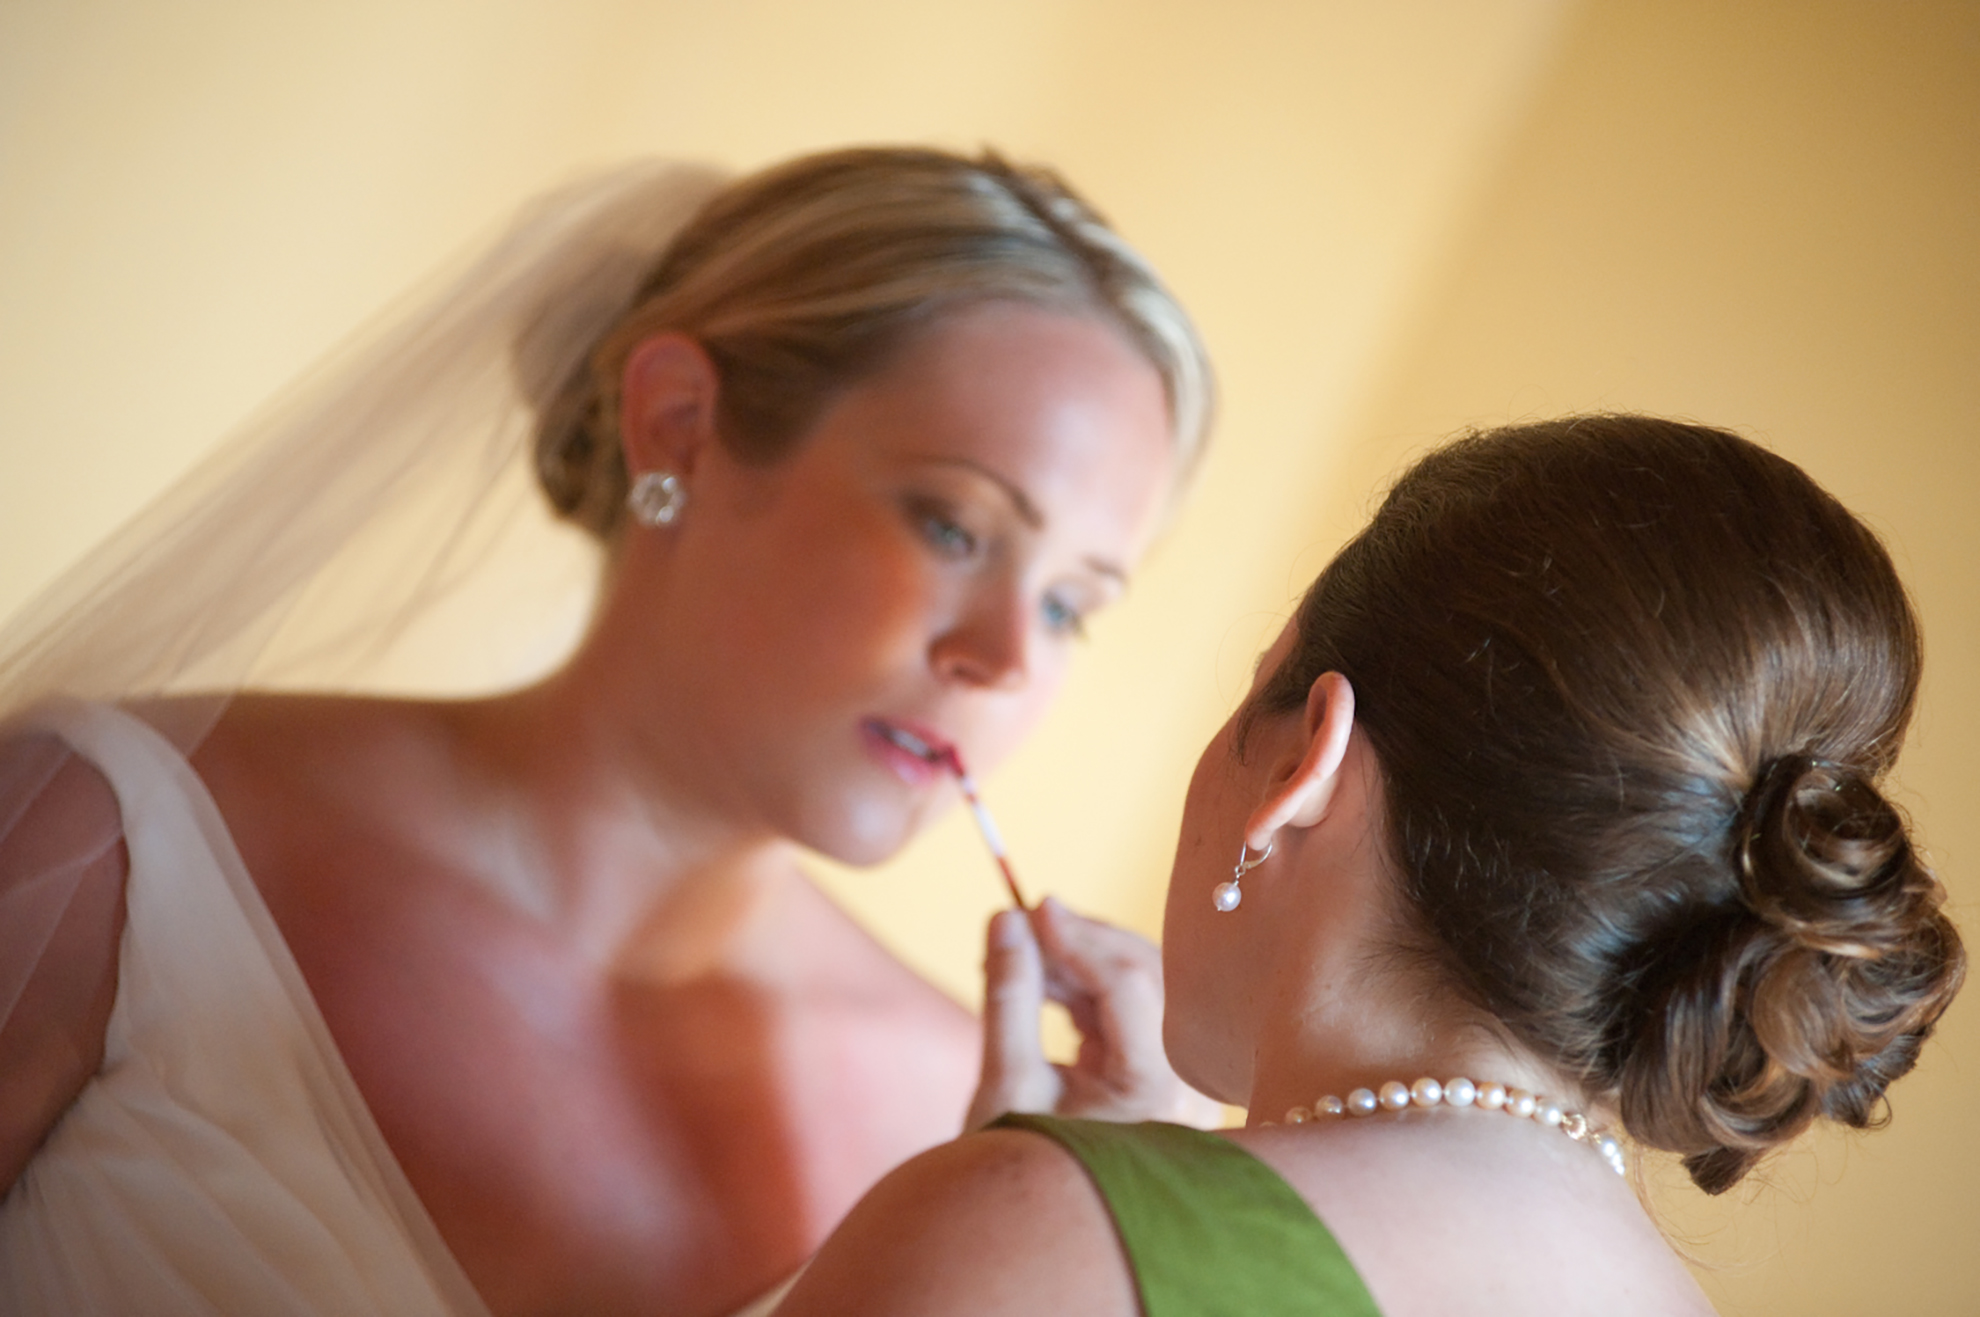 bride getting her makeup done in her dress and veil